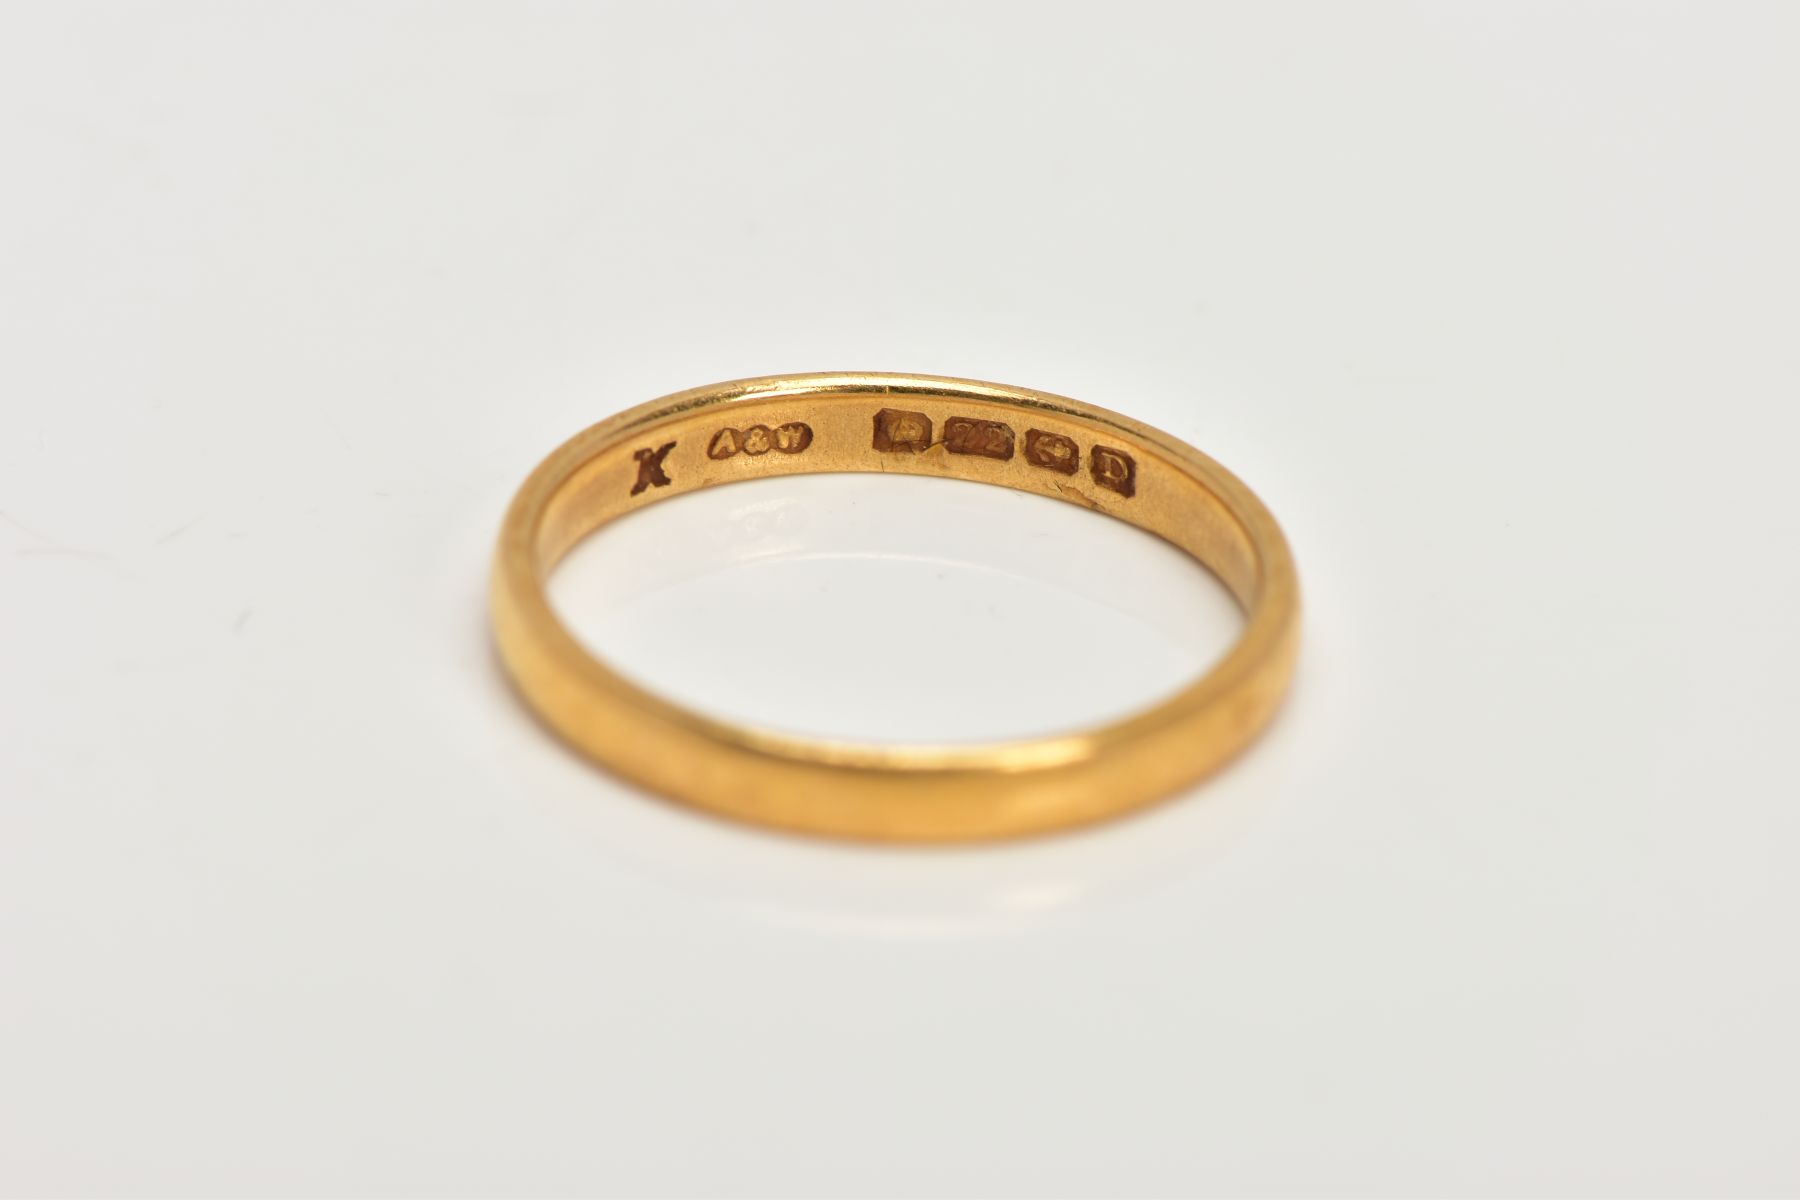 A 22CT GOLD BAND RING, of plain design, 22ct hallmark for Birmingham 1928, width 2mm, ring size K - Image 2 of 2